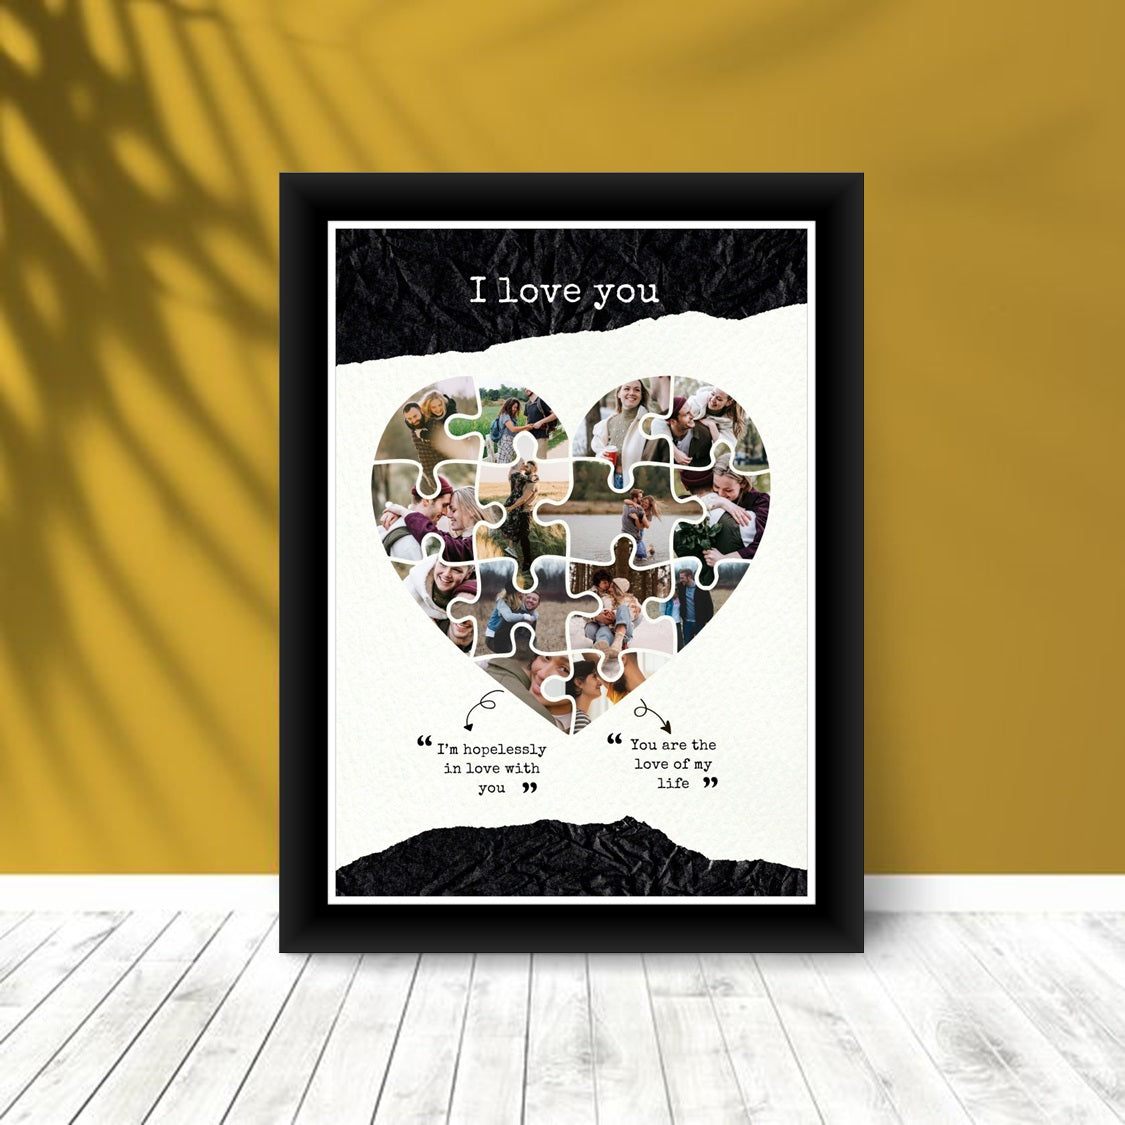 Buy or send Heartfelt Harmony Collage Black Frame online with bakers wagon